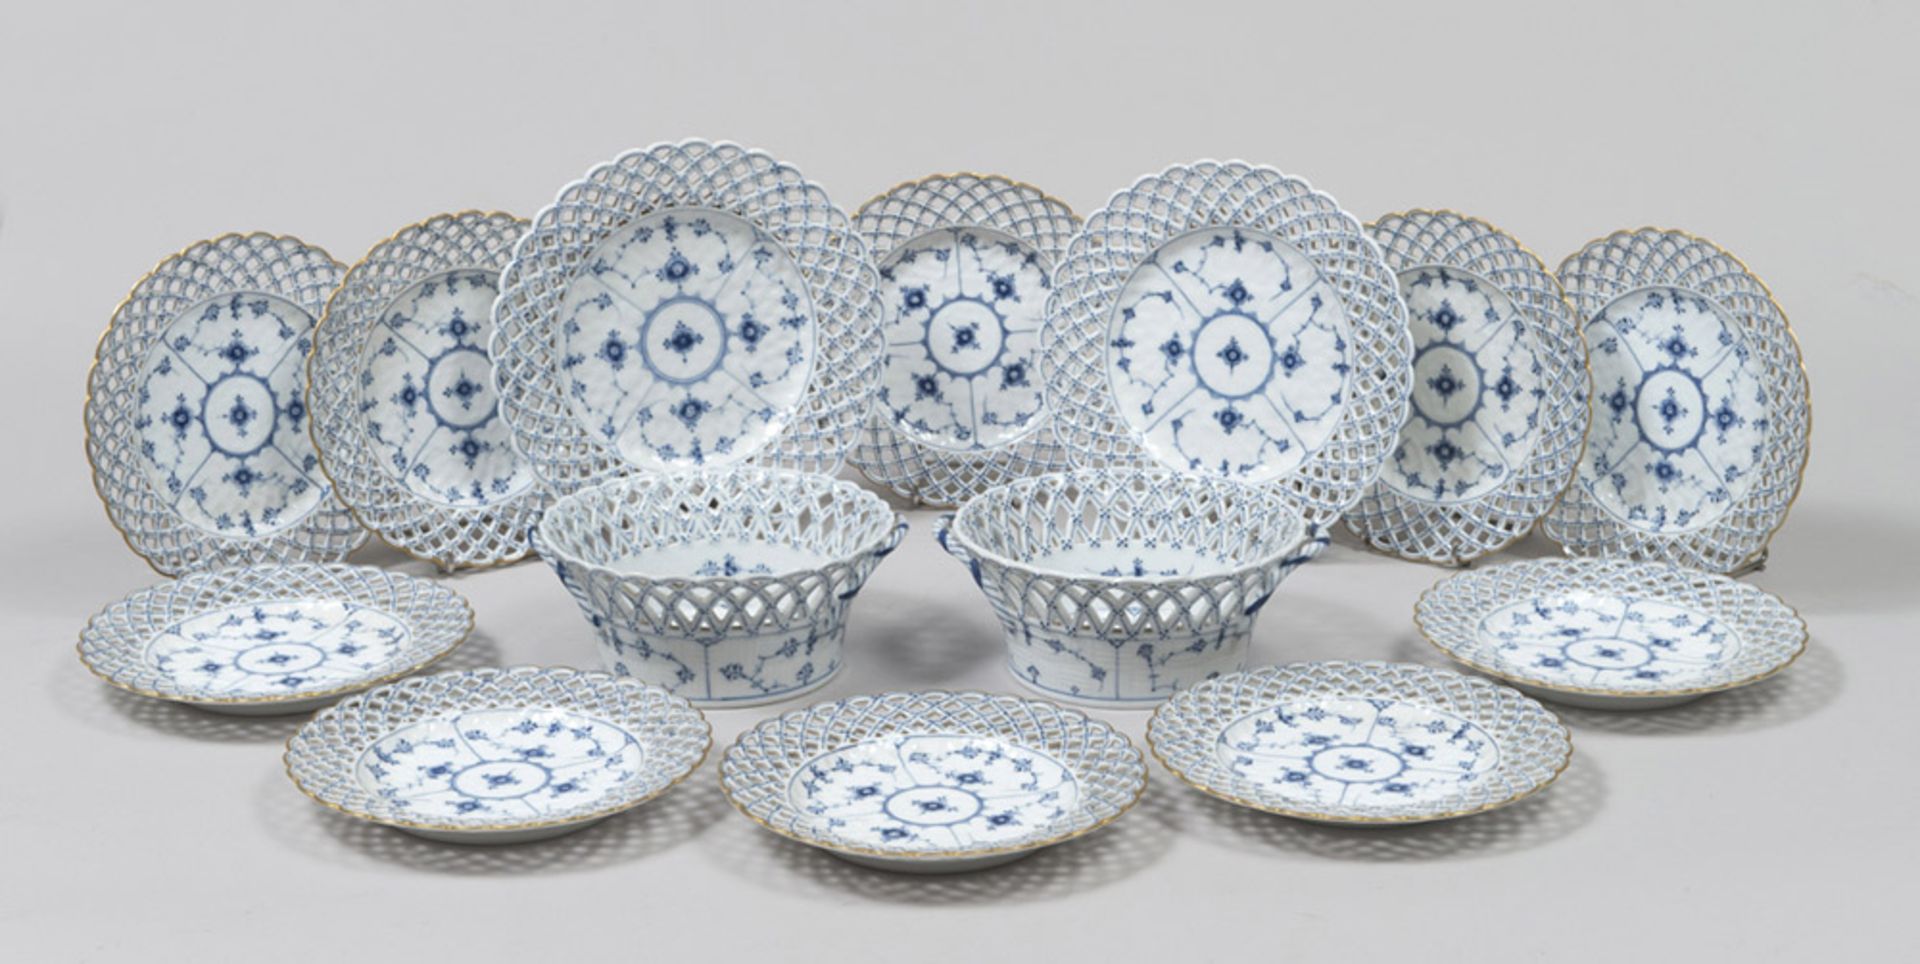 PART OF A PORCELAIN DISHES SET, COPENAGHEN EARLY 20TH CENTURY